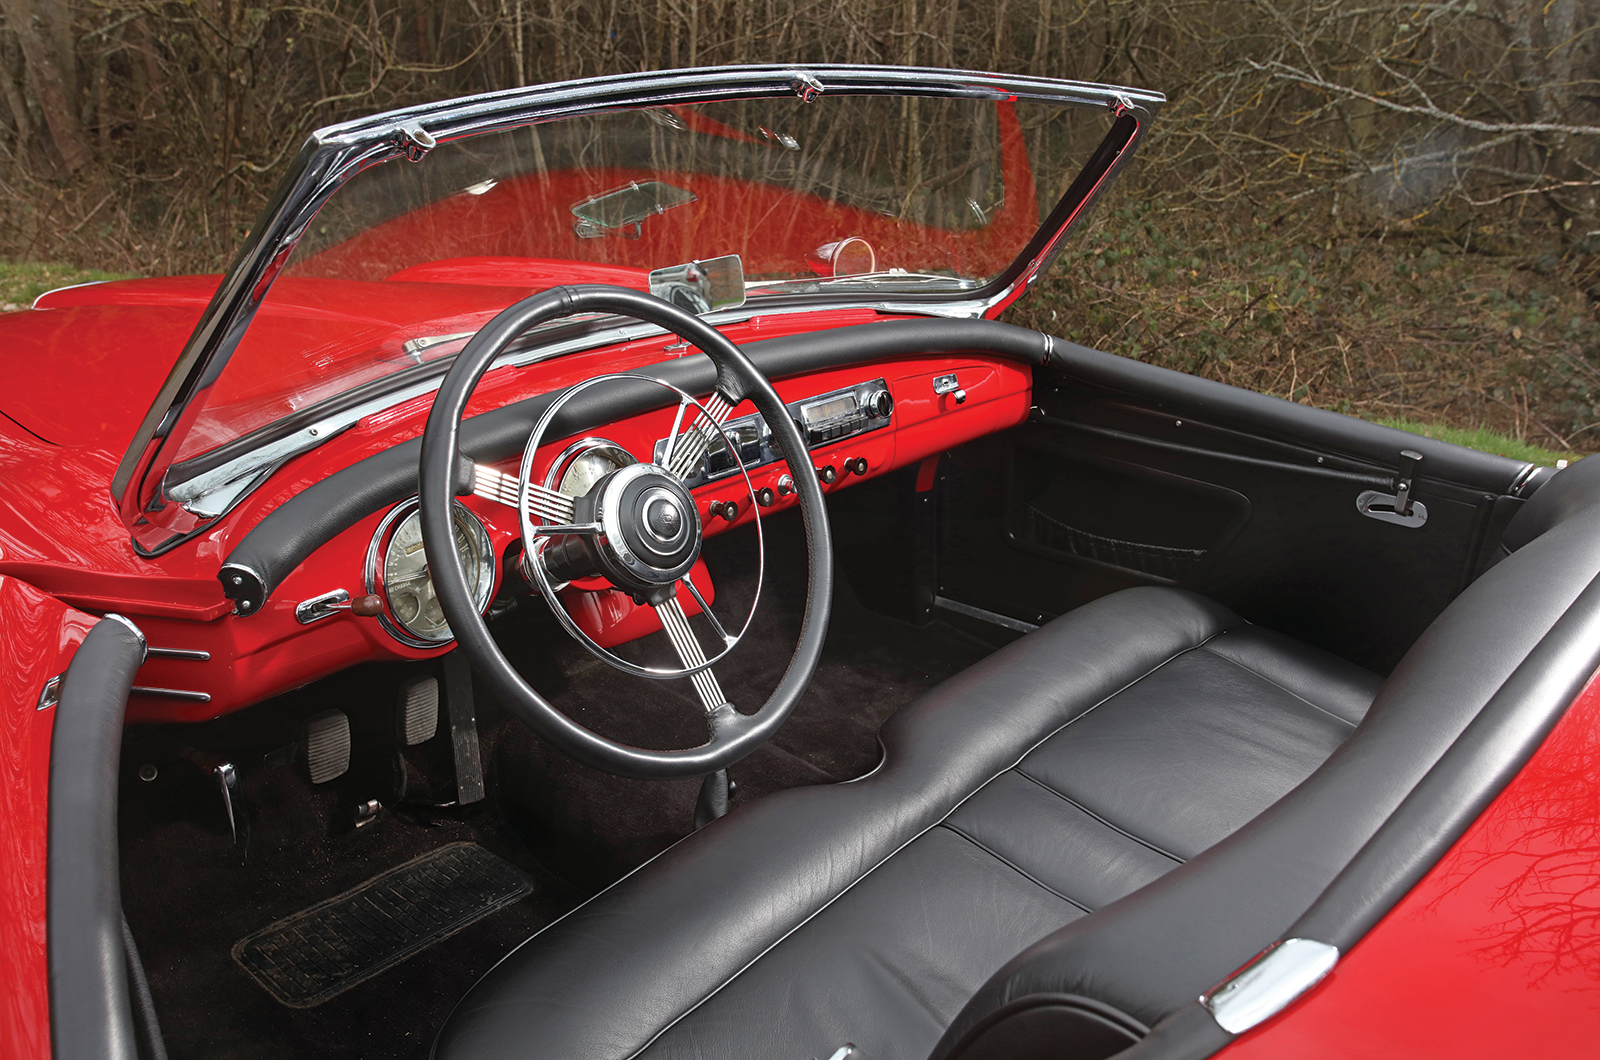 Nash-Healey: Italian style, American muscle and British brains